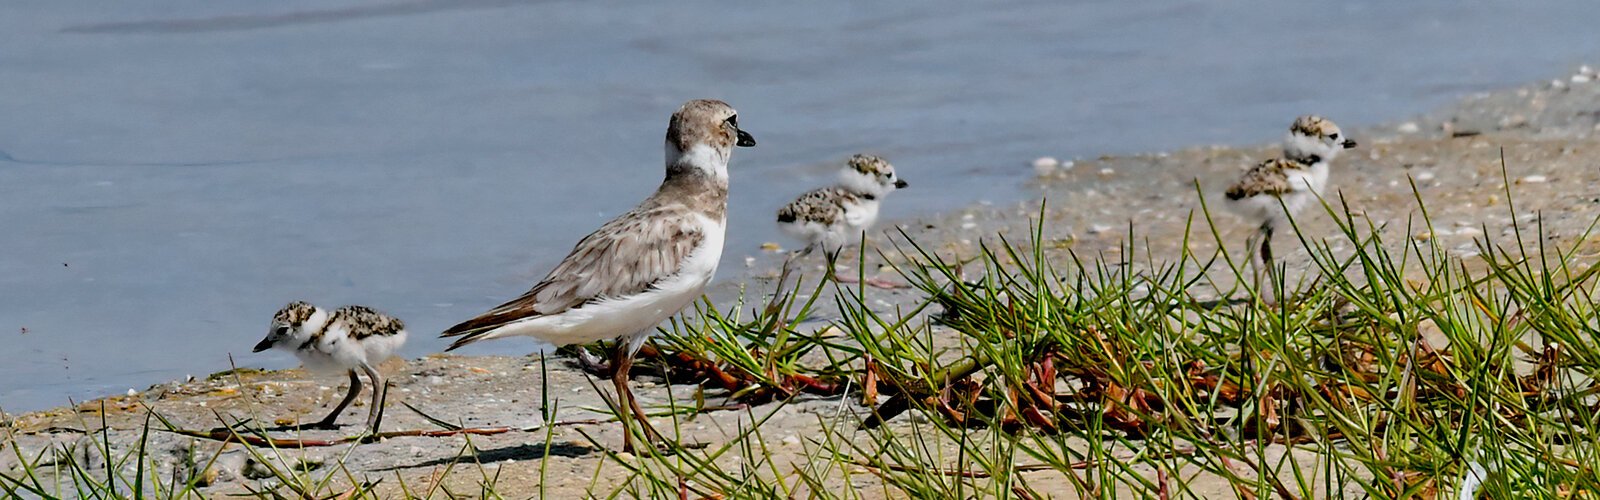 Three Wilson’s plover hatchlings forage for tiny insects under the supervision of their mother. They are described as precocial because they start feeding on their own soon after hatching, just like ducklings. This species is also protected by law.